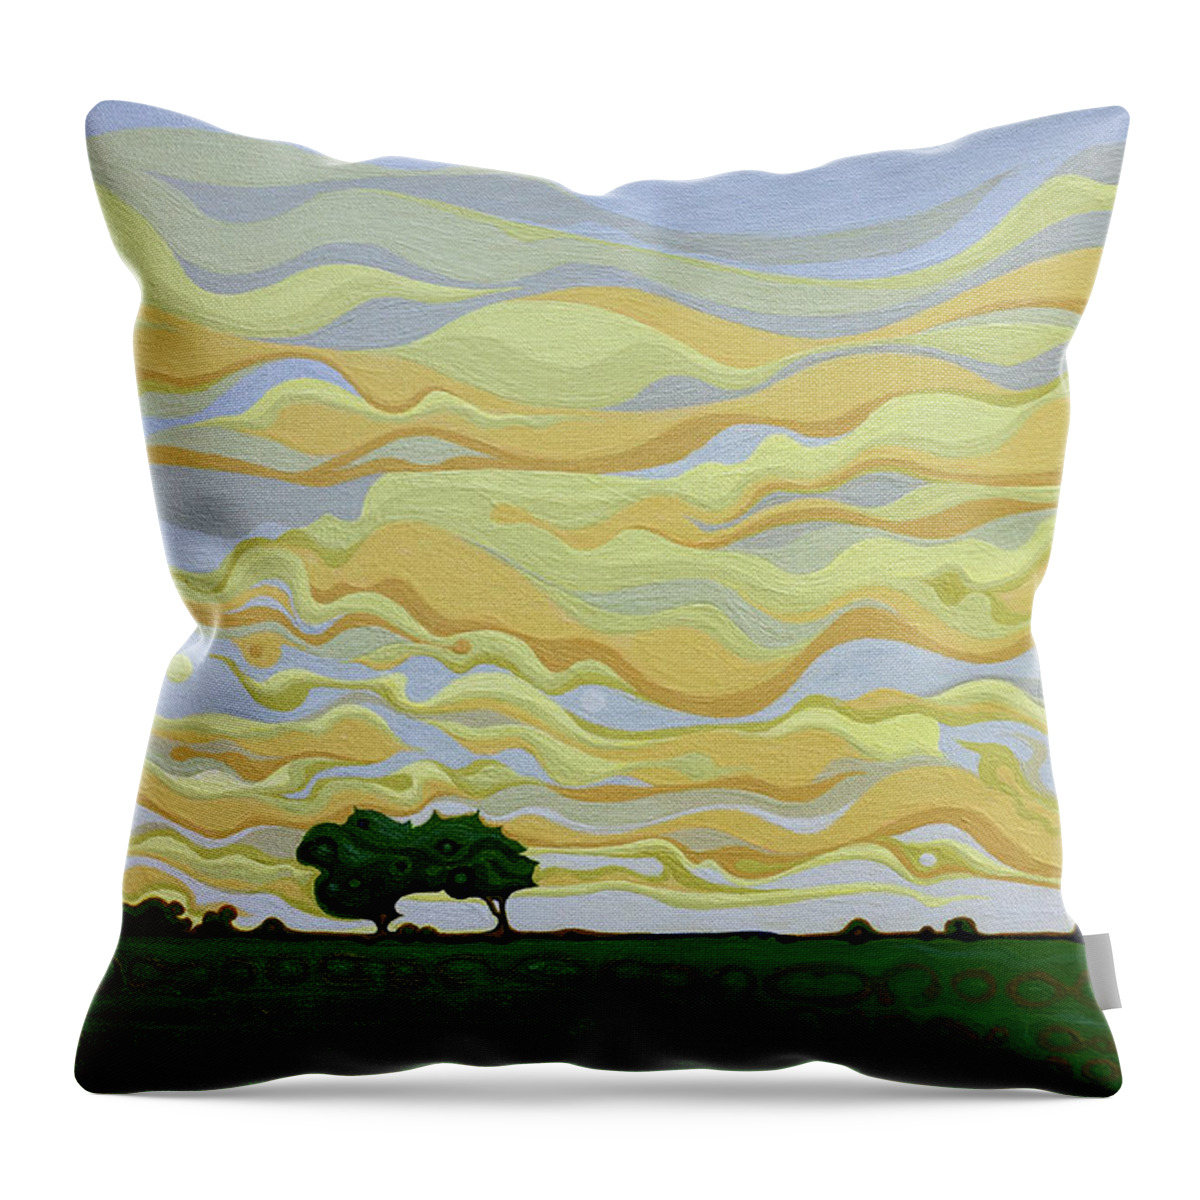 Landscape Throw Pillow featuring the painting Nimble Sigh Sky by Amy Ferrari